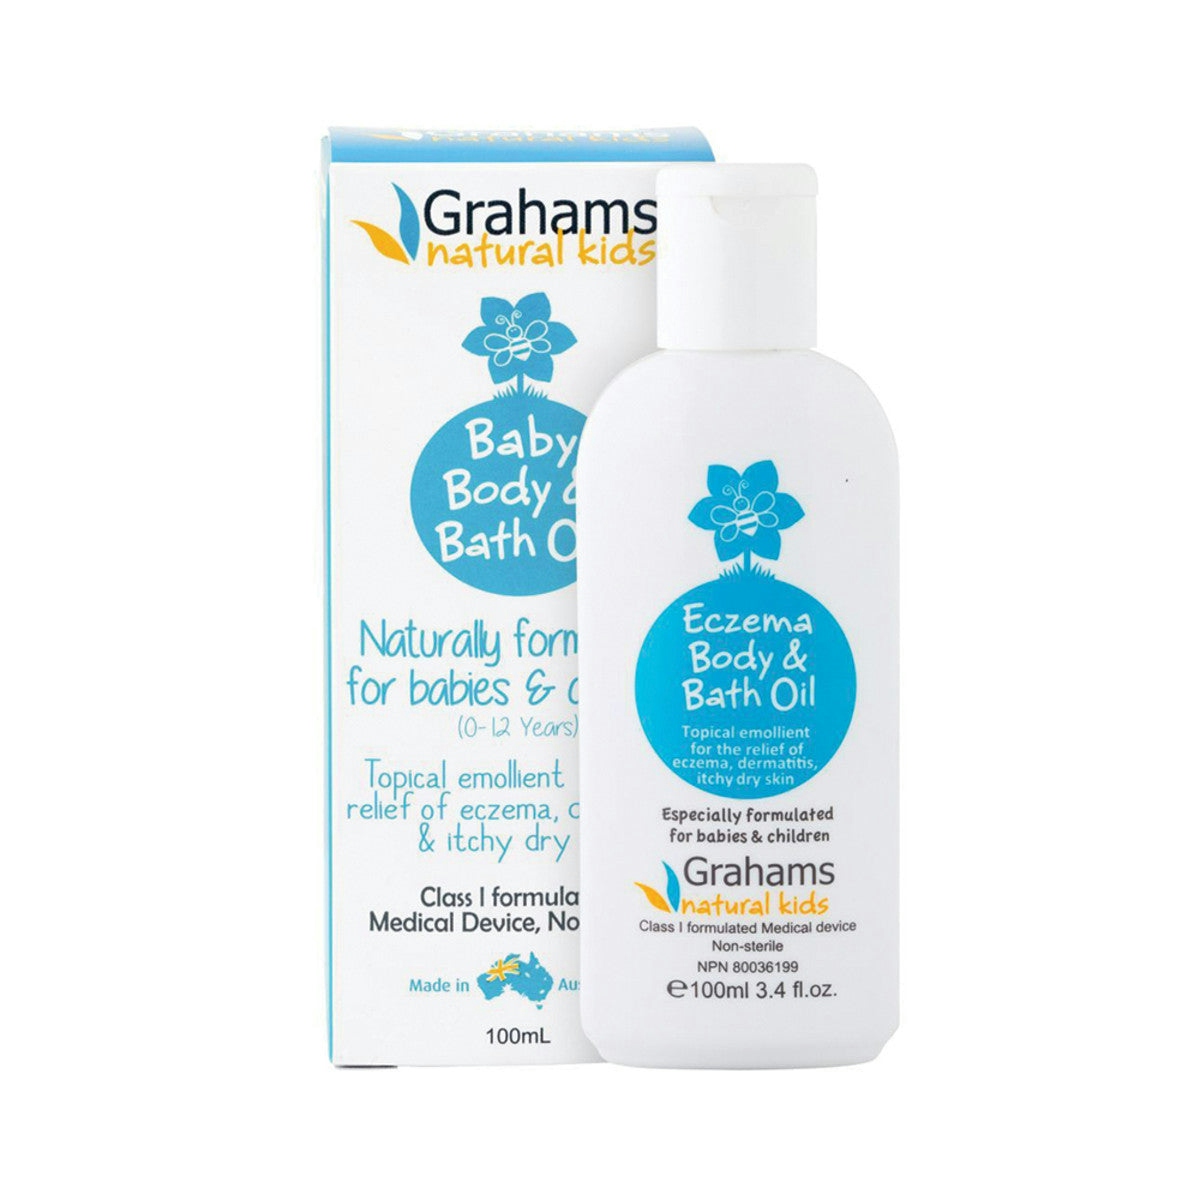 image of Grahams Natural Baby Eczema Body & Bath Oil 100ml on white background 